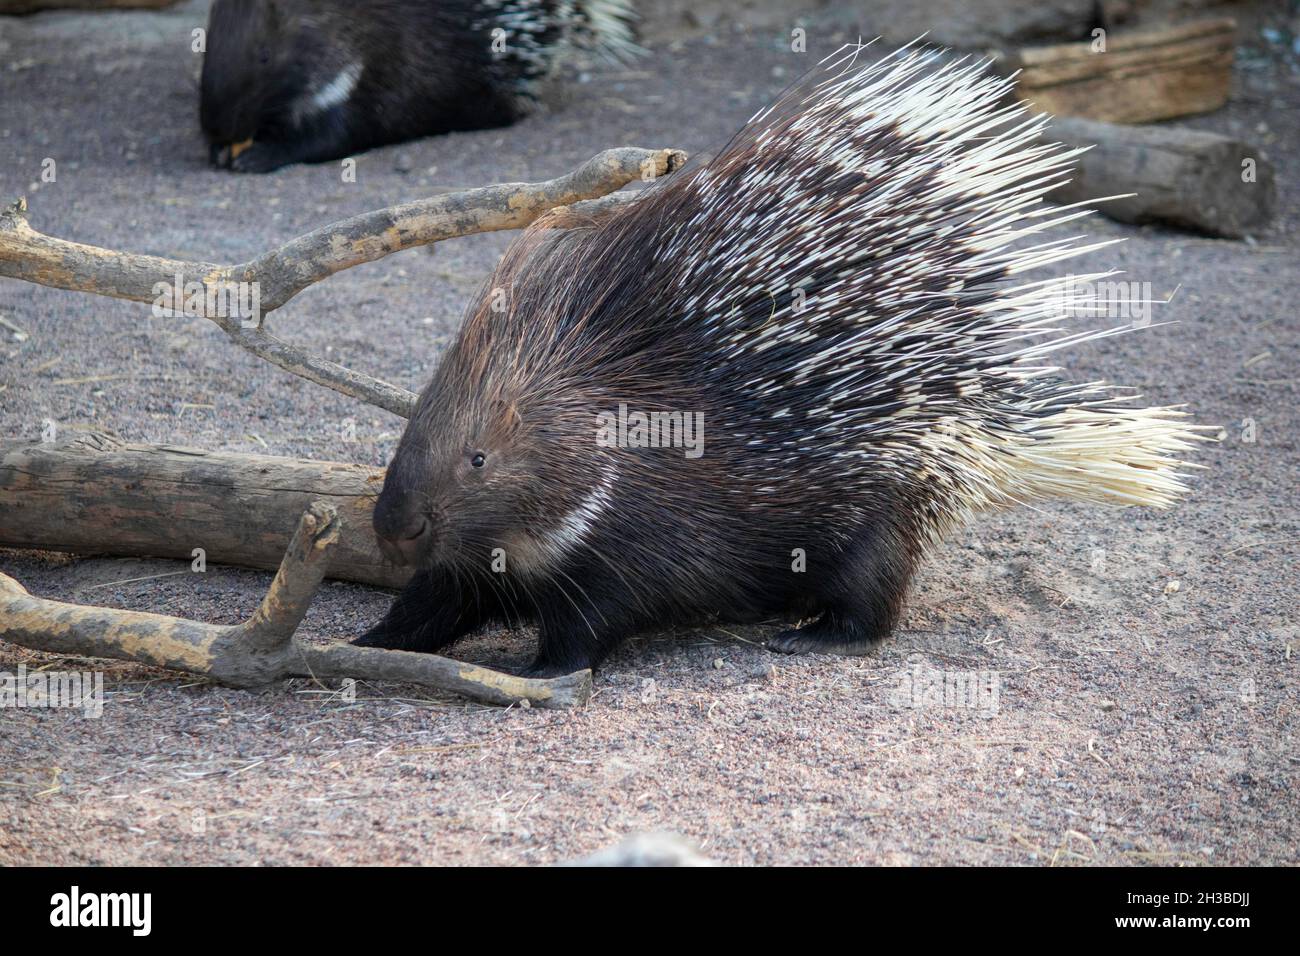 https://c8.alamy.com/comp/2H3BDJJ/cute-porcupine-on-a-sunny-day-in-the-aviary-at-the-zoo-2H3BDJJ.jpg